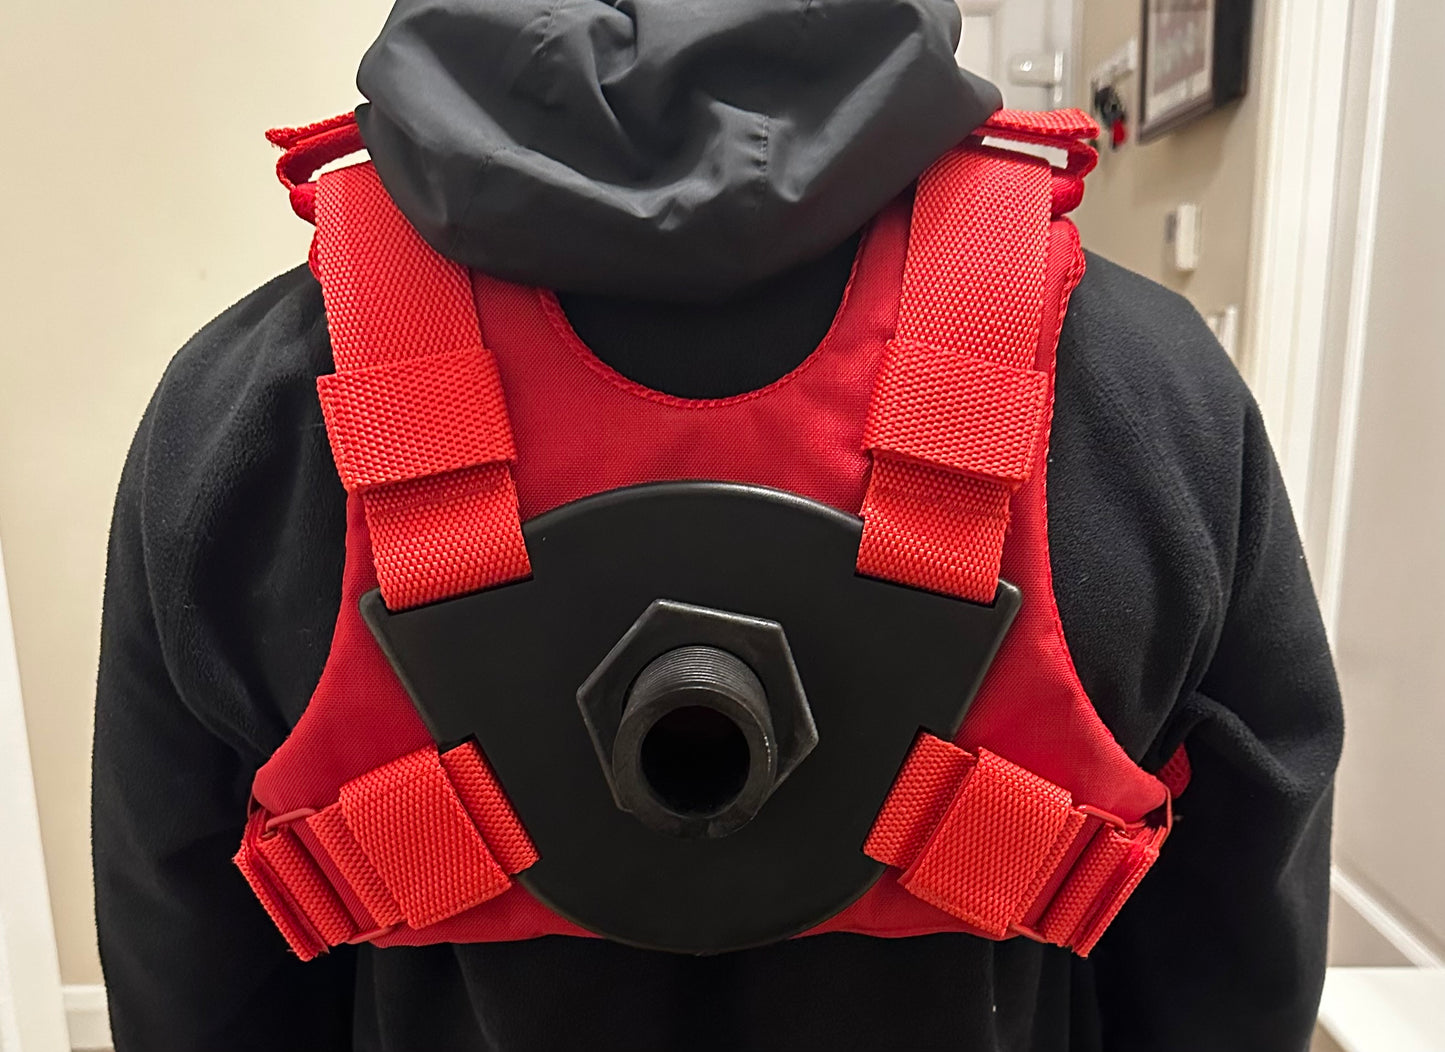 Red Infinity Weighted Vest 80 KGs plate carrier for gym fitness callisthenics crossfit press ups dips handstands squats